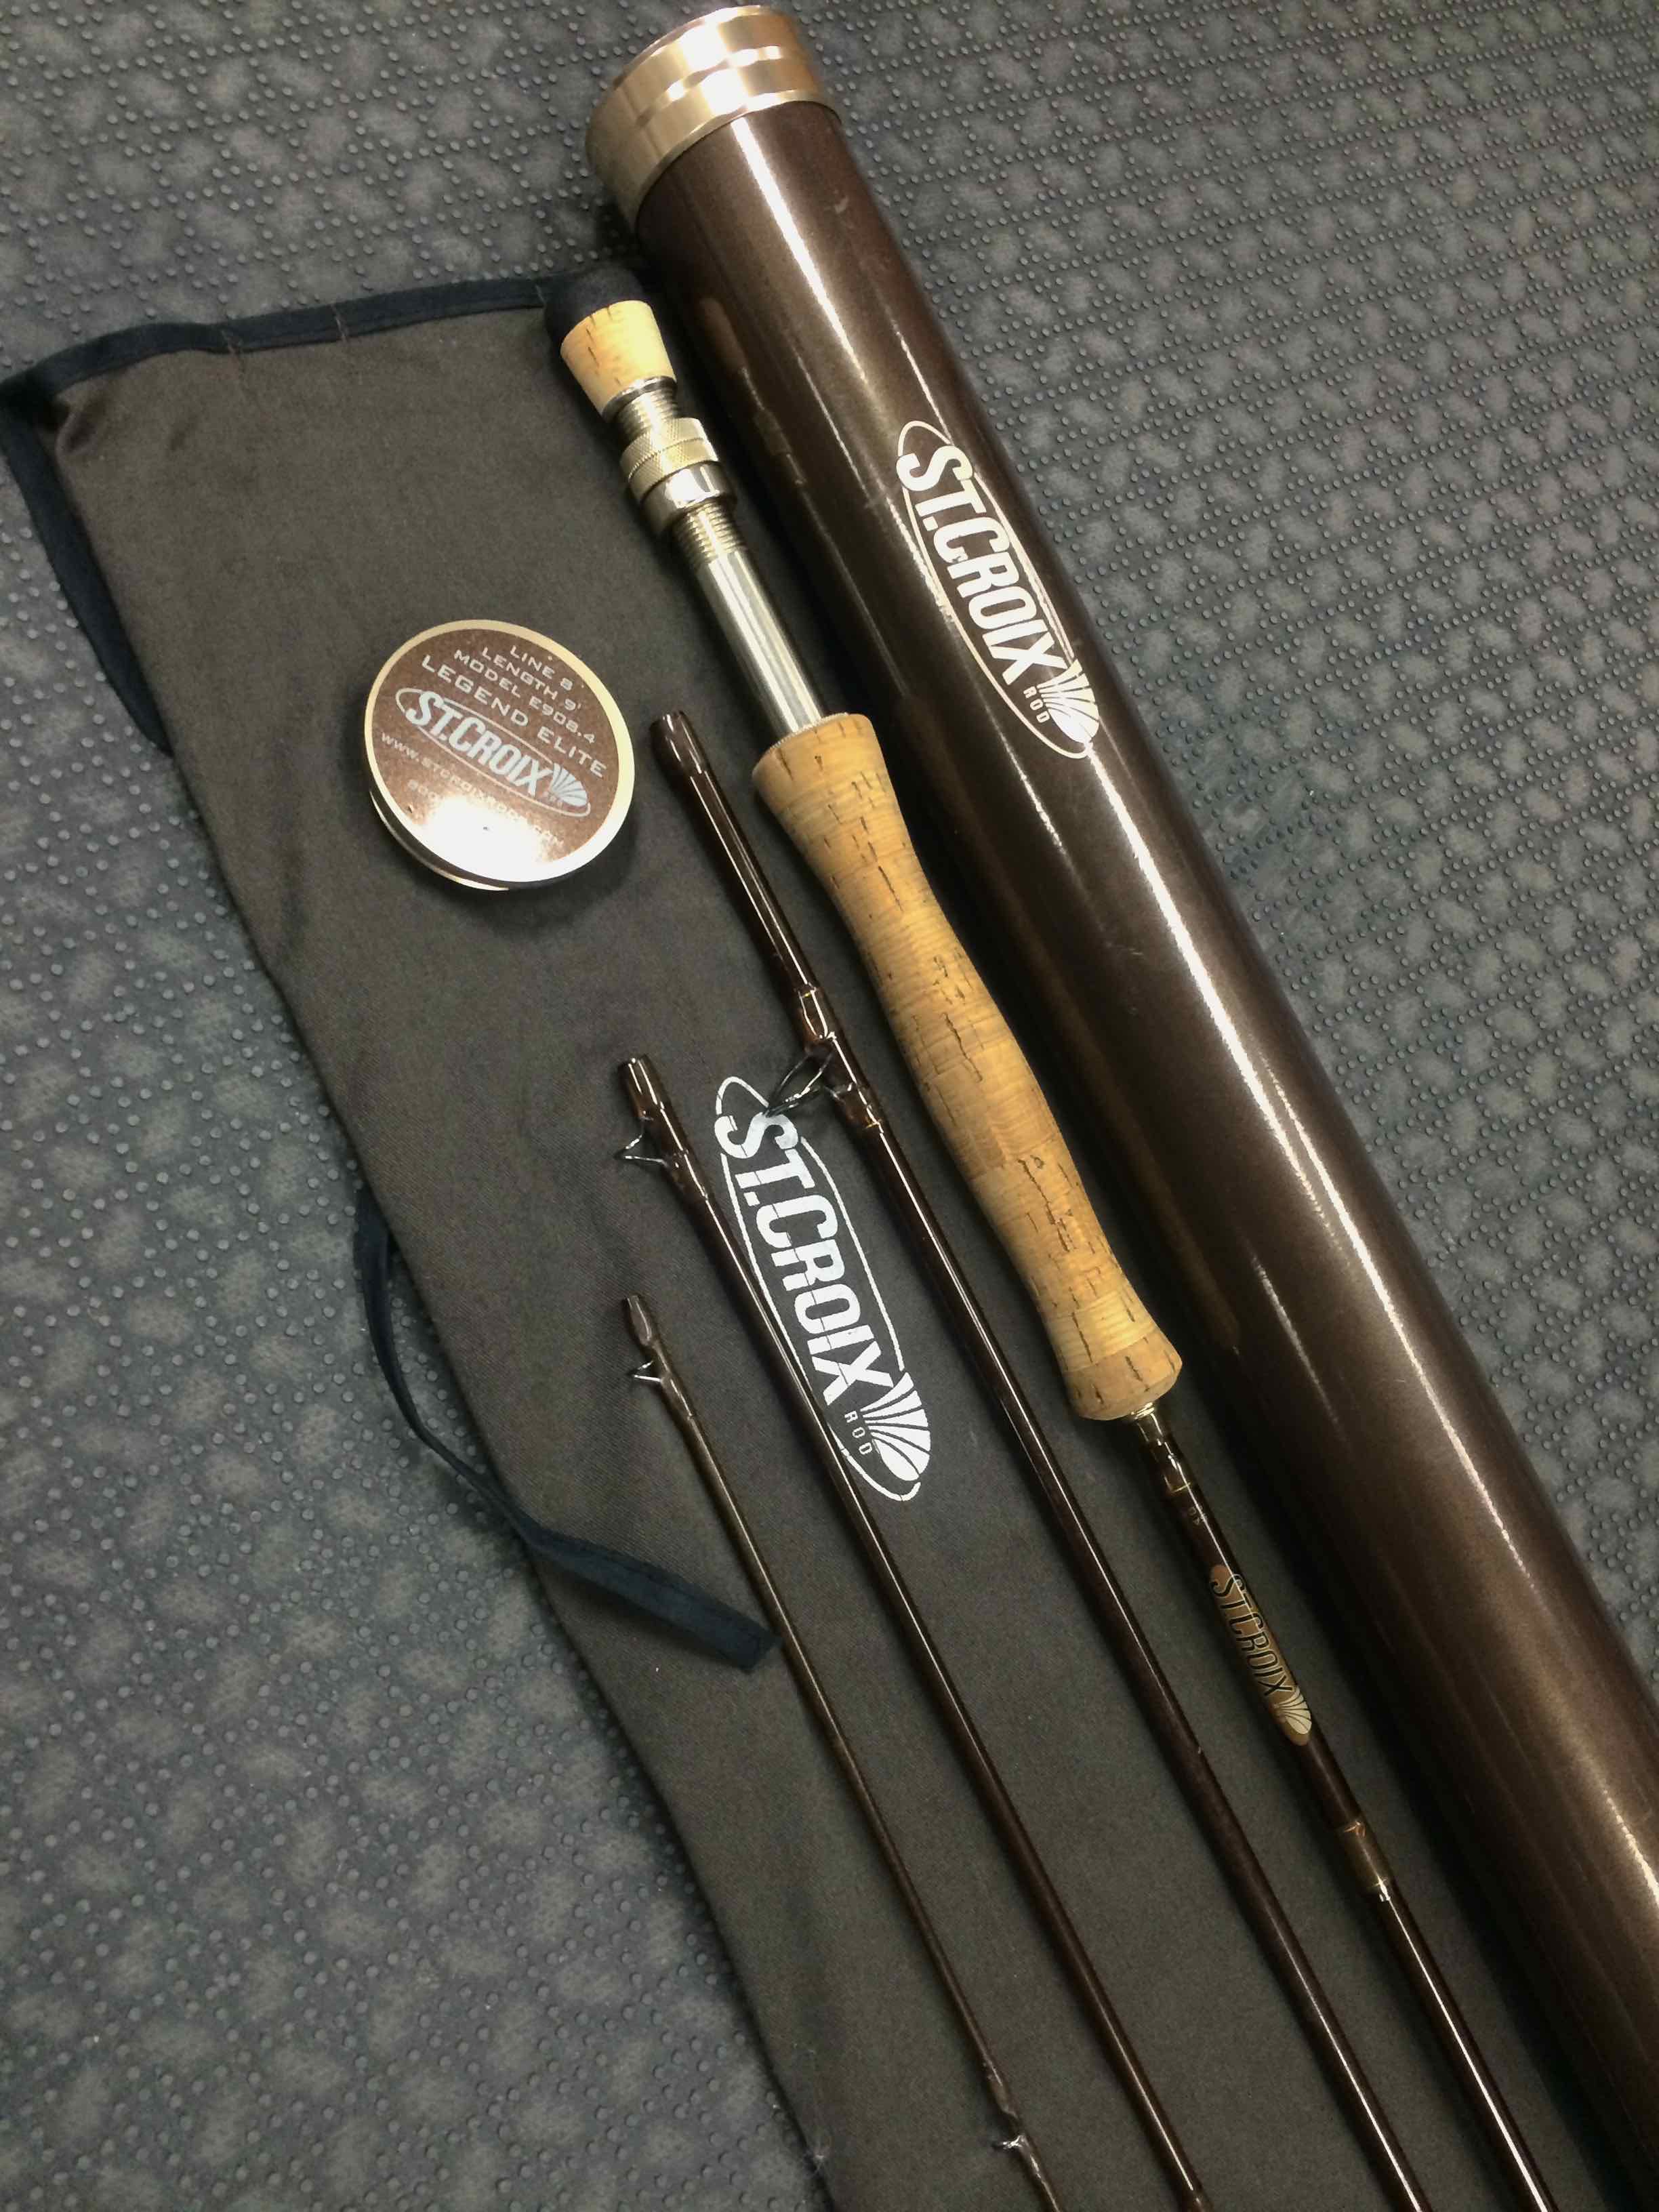 st croix travel fly rod